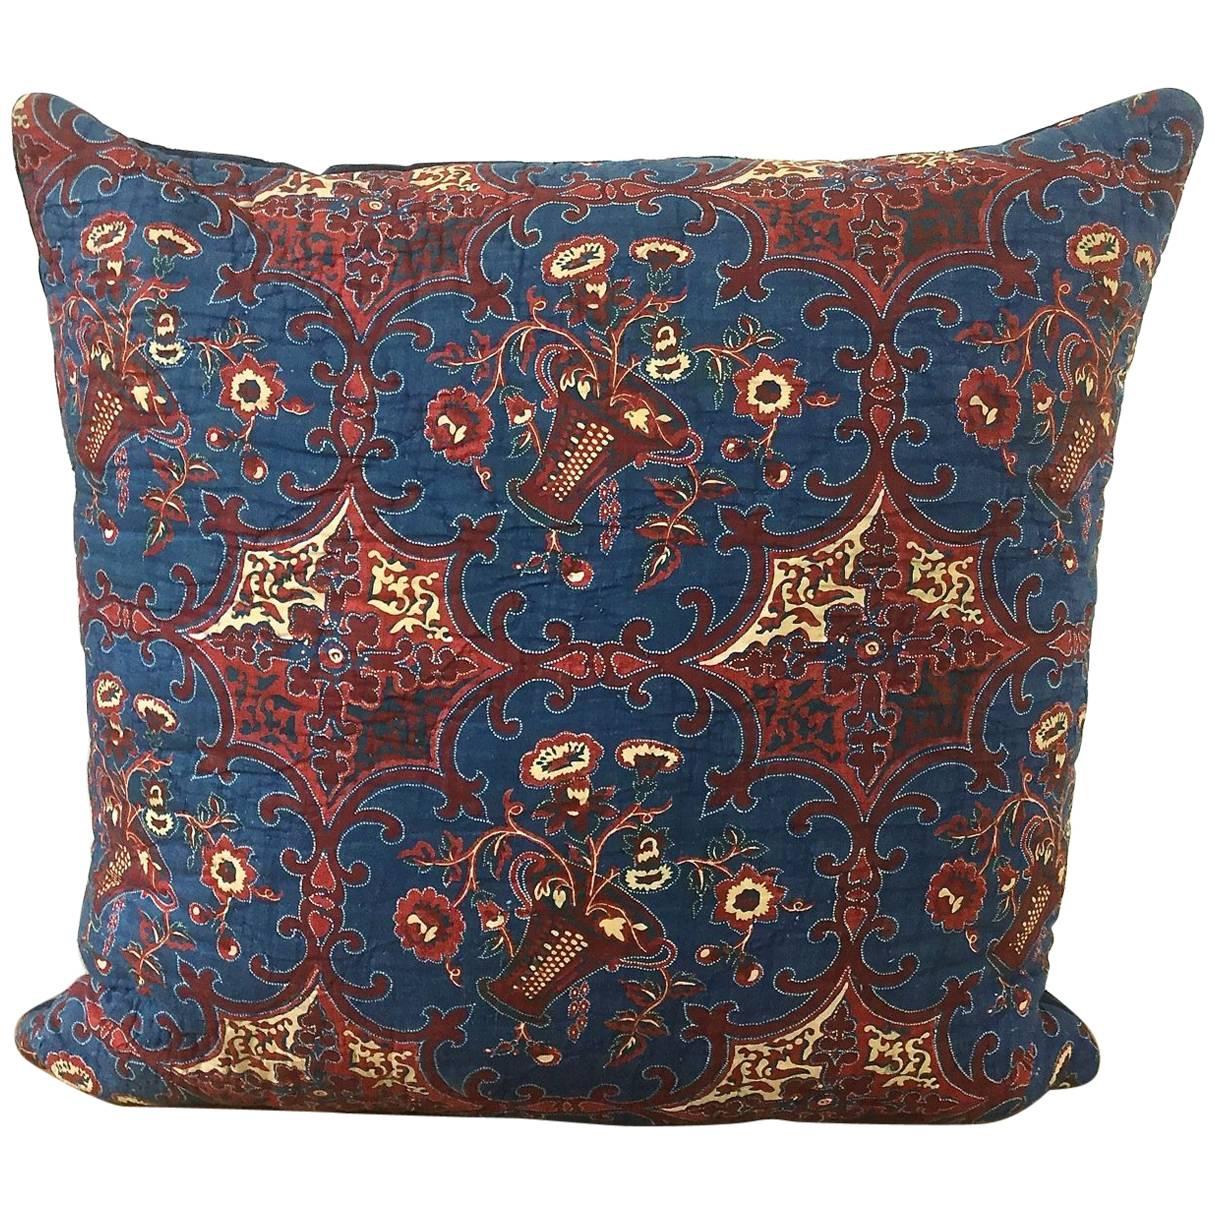 19th Century French Antique Pillow Blockprinted with Baskets of Flowers